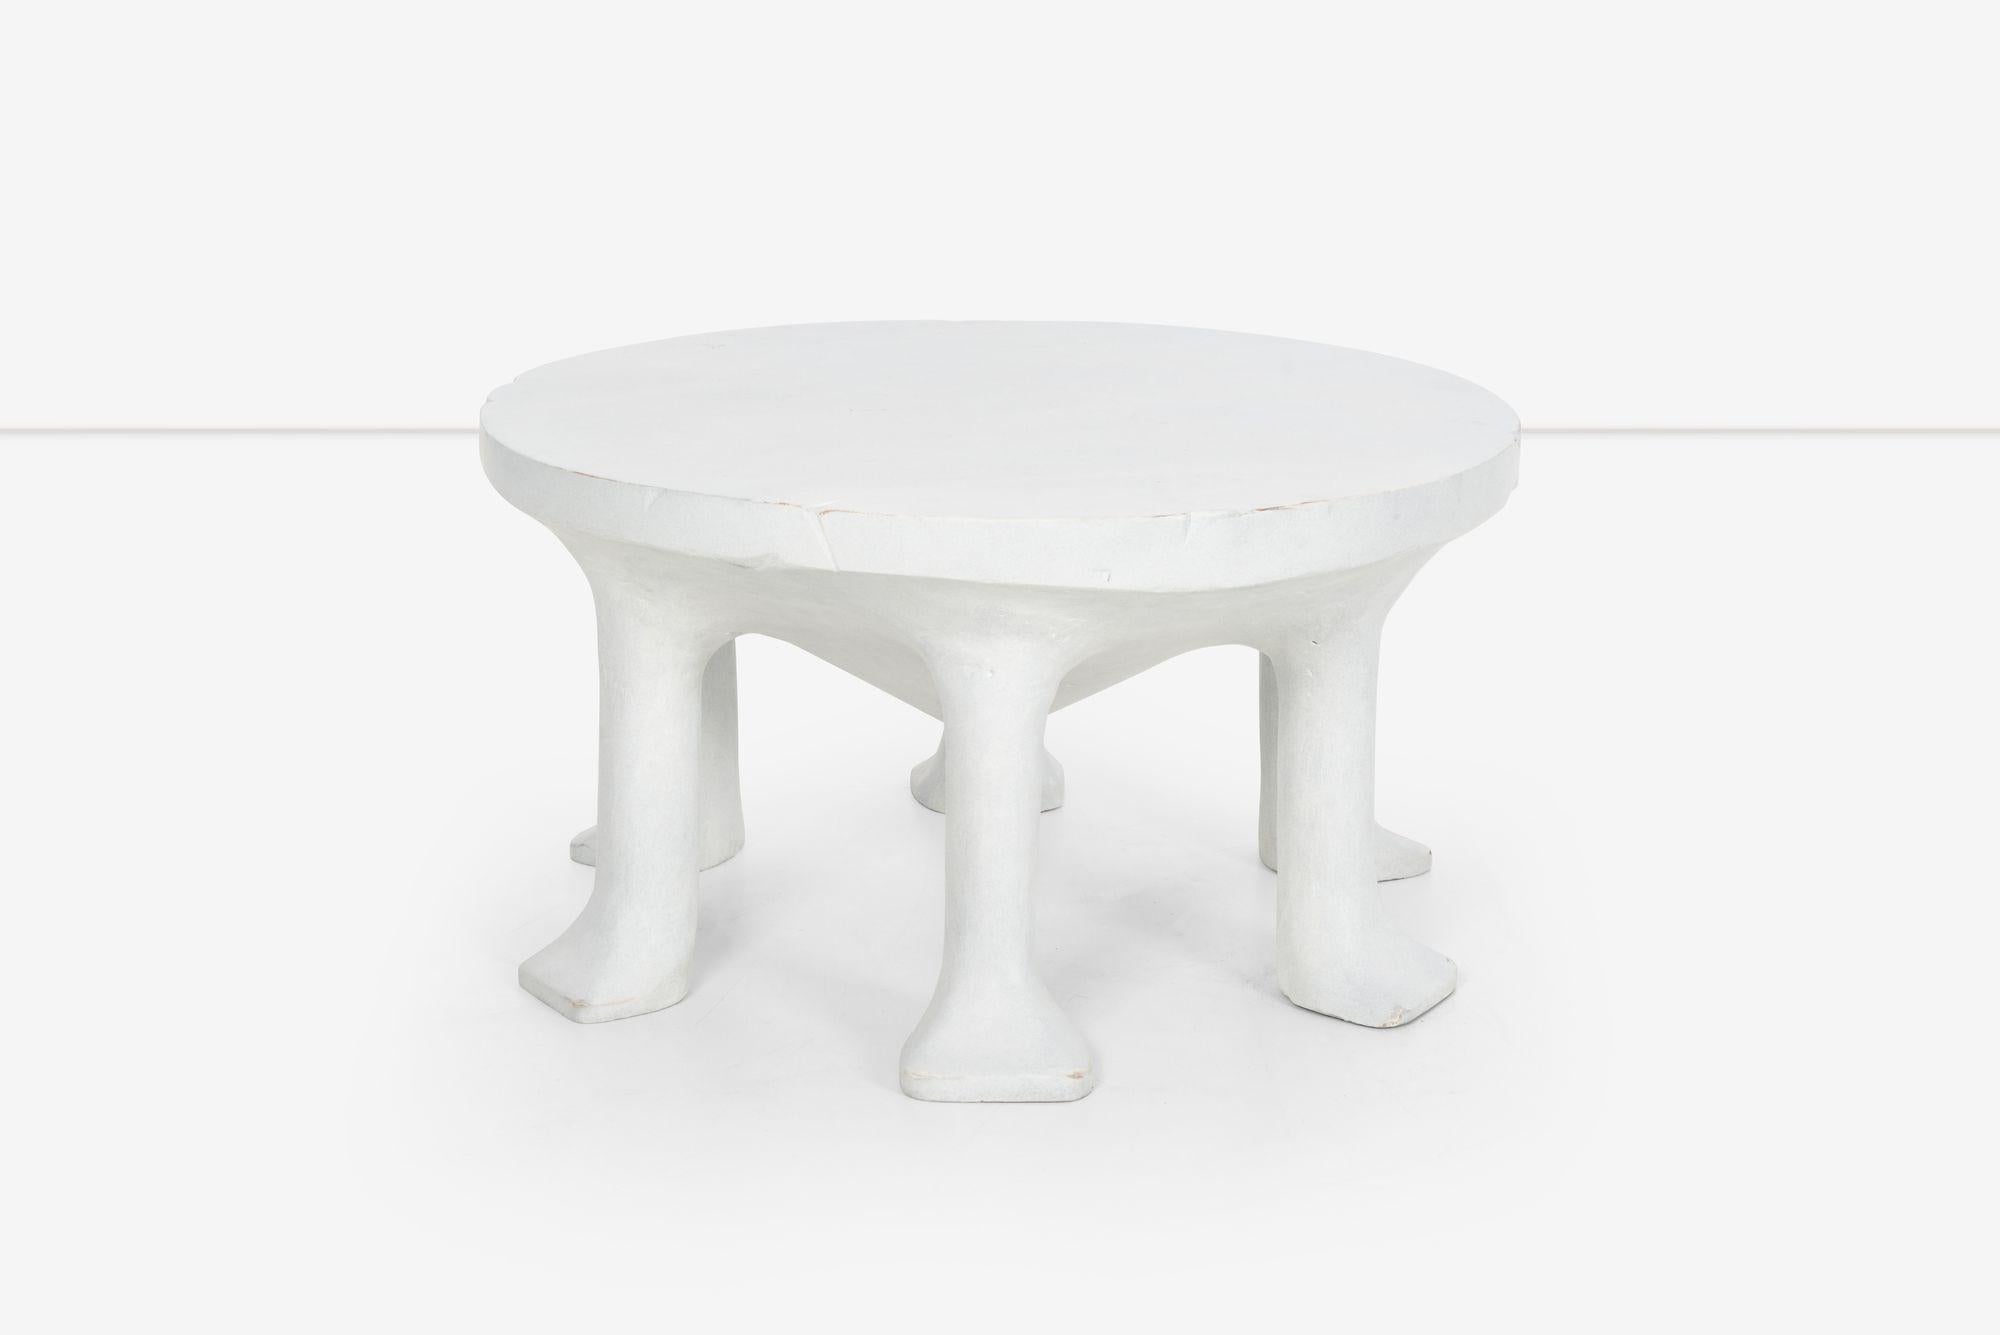 Late 20th Century John Dickinson Prototype African Table from the Firehouse, San Francisco For Sale